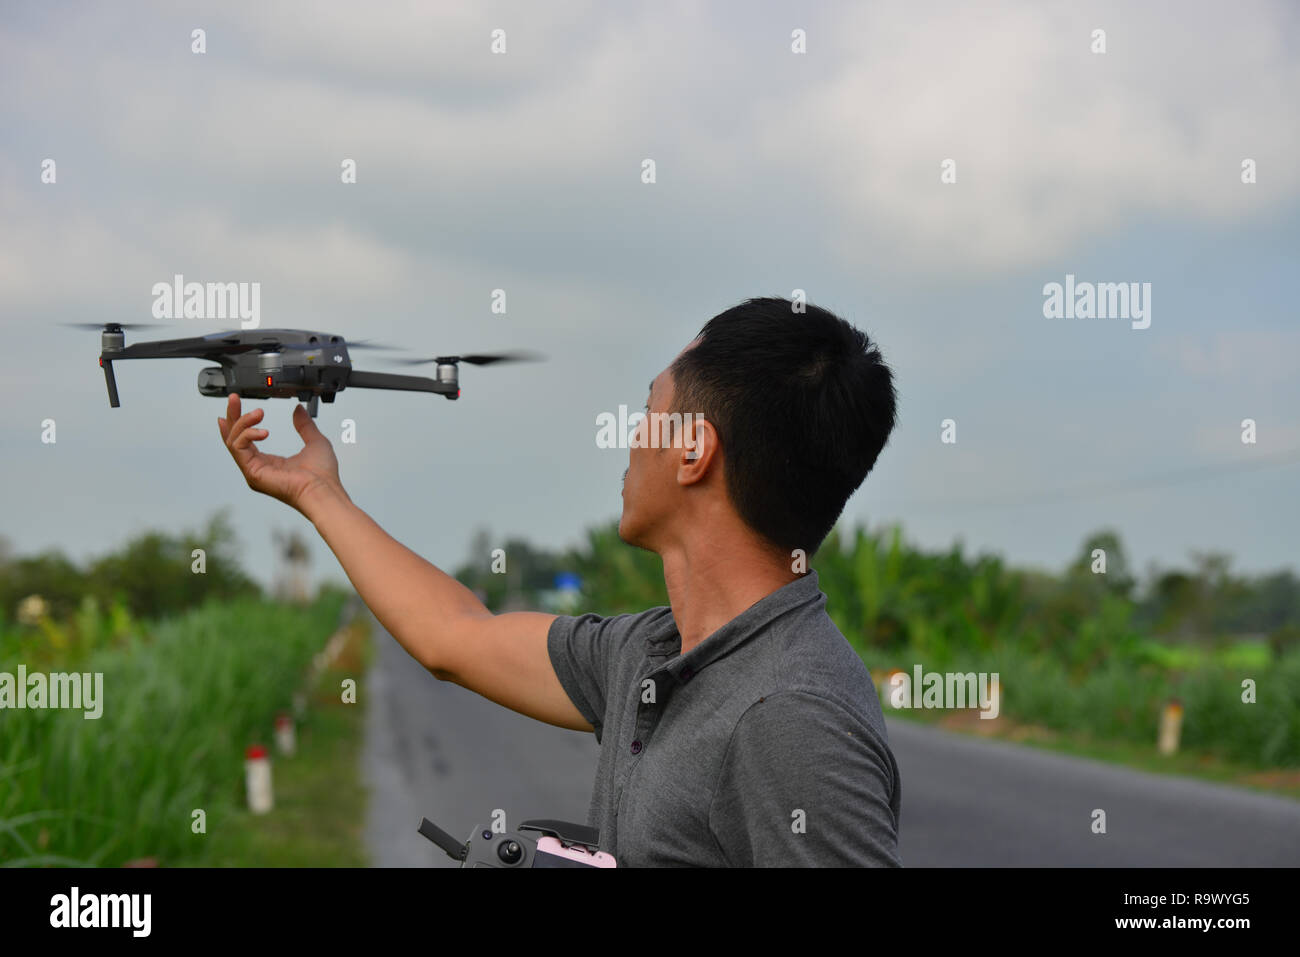 Can Tho, Vietnam - Nov 17, 2018. A young man holding the Mavic 2 Pro drone  at countryside. Drone use is allowed in Vietnam but need a flying license  Stock Photo - Alamy